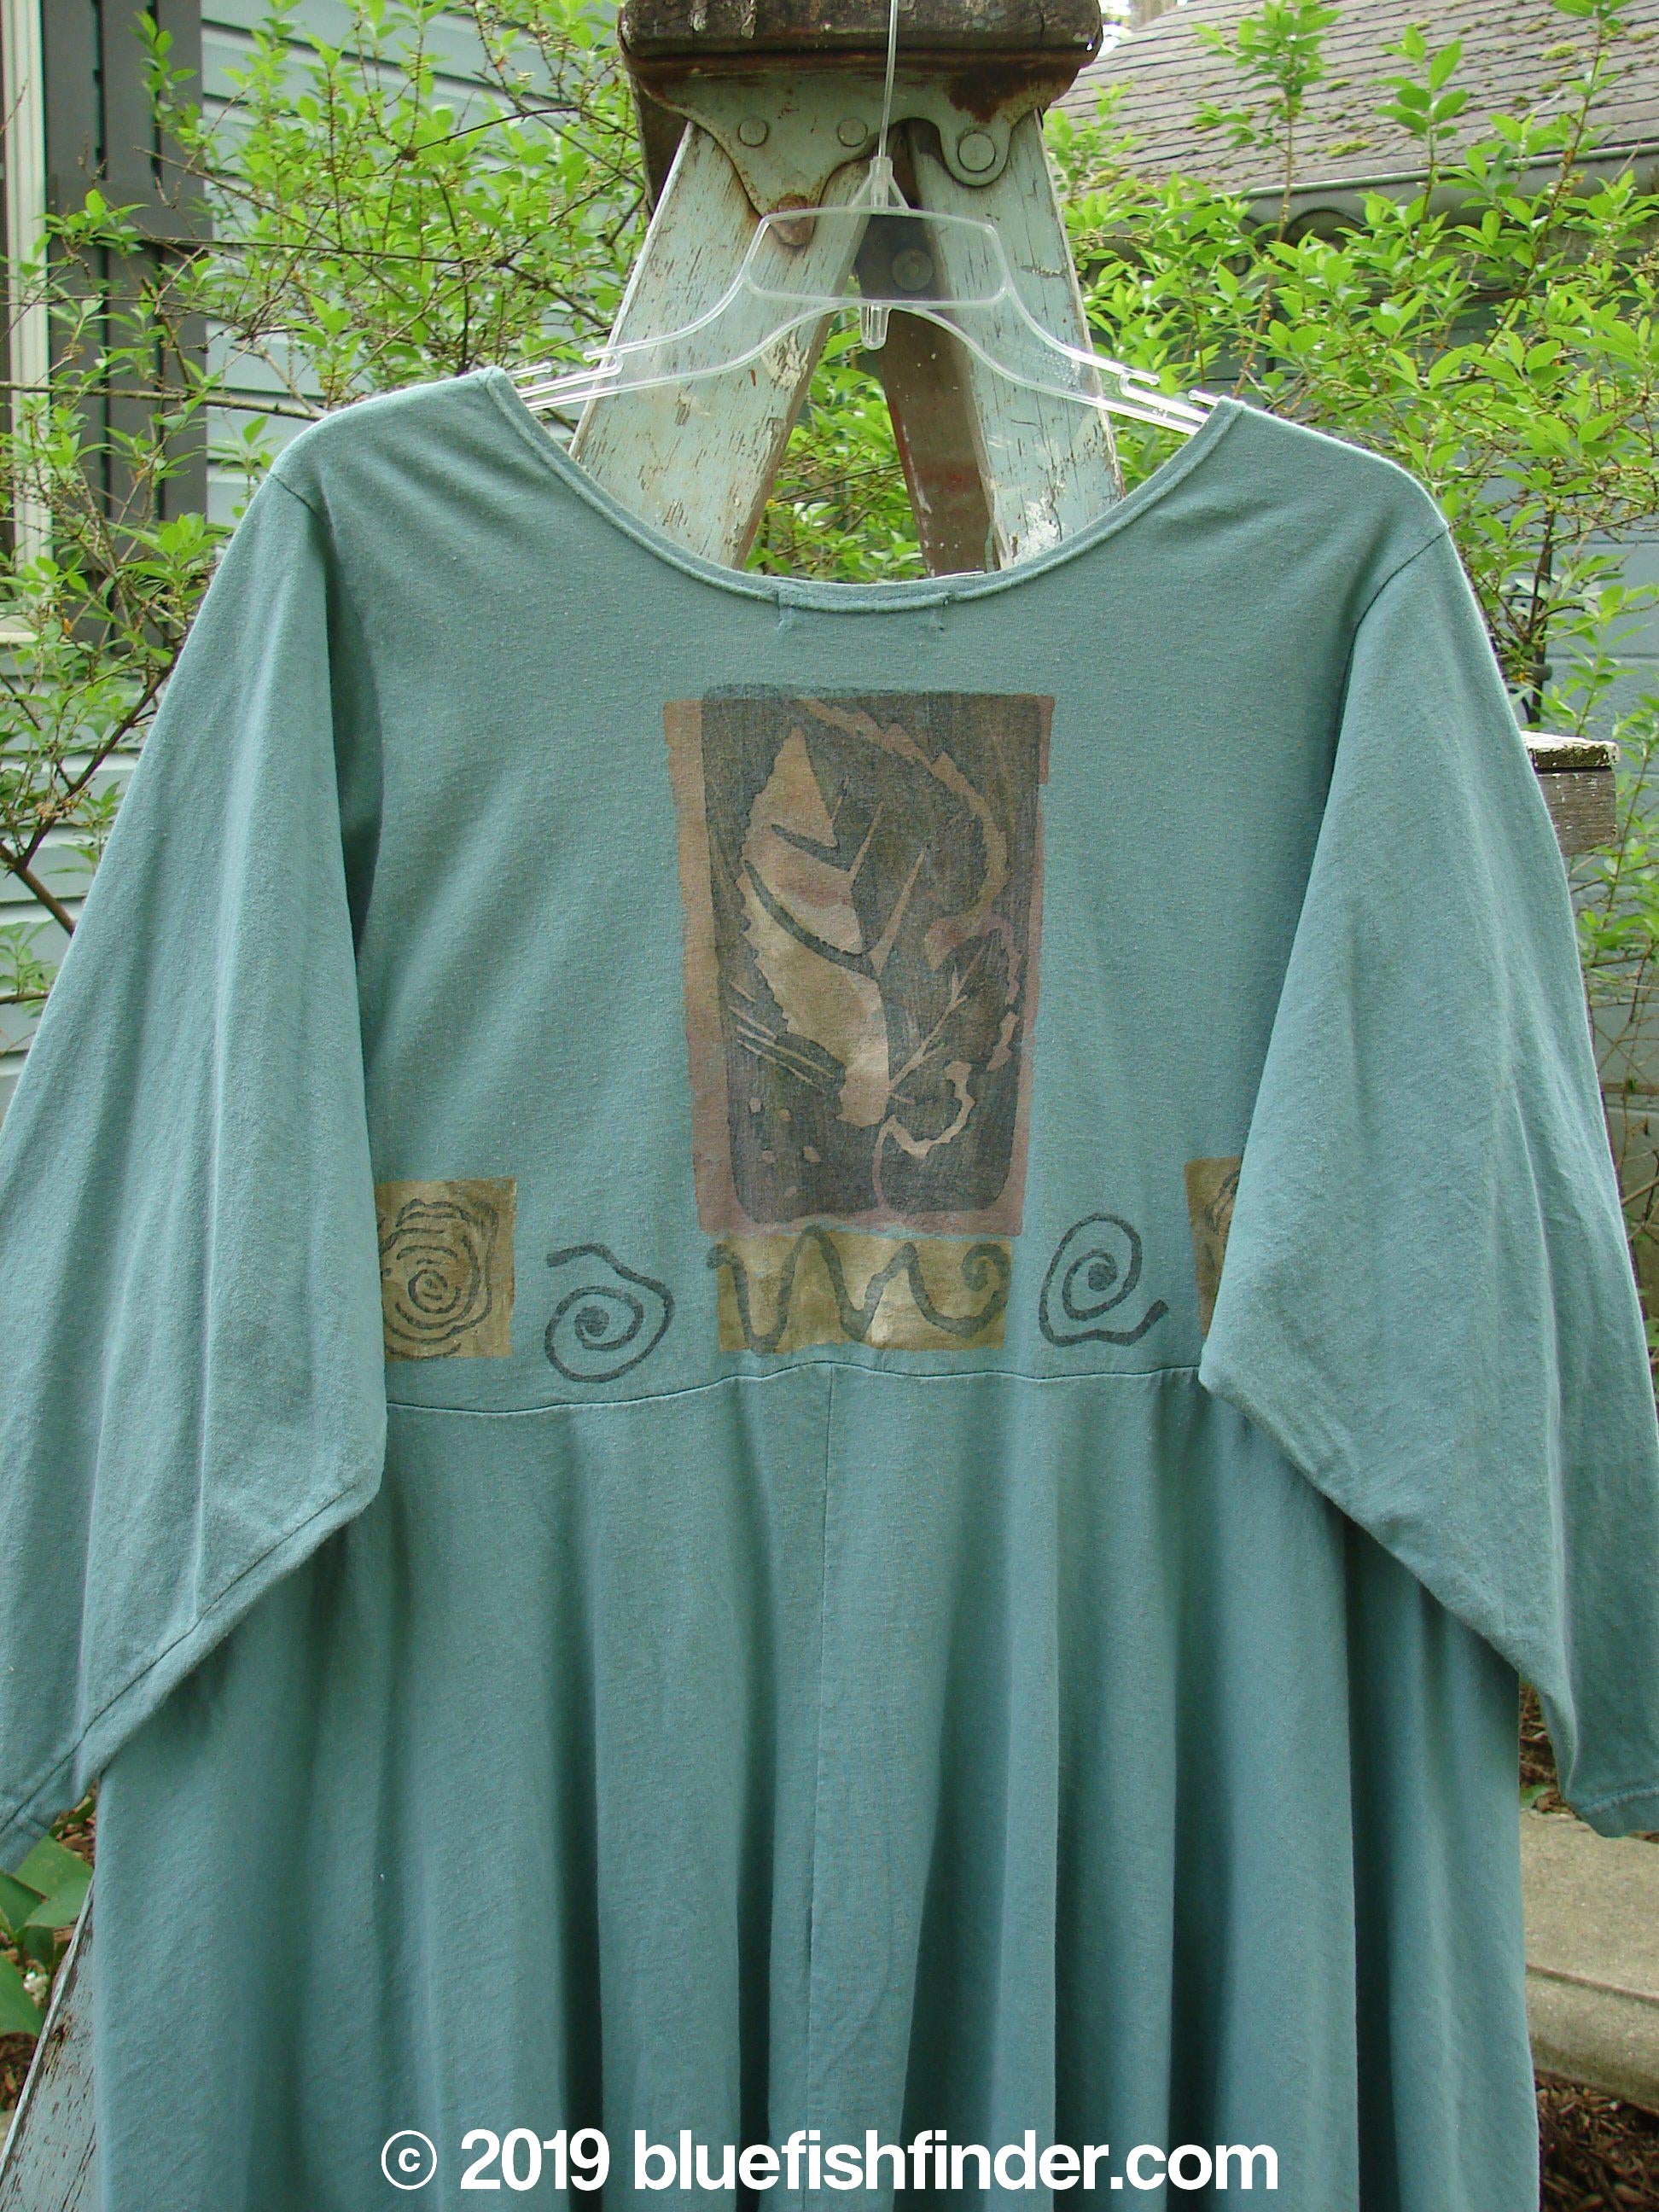 1994 Juniper Dress Swirl Leaf Sea Journey Size 2: A vintage green dress with a leaf and swirl design. Features a rounded collar, recycled paper button closures, and a sweeping swing lower.